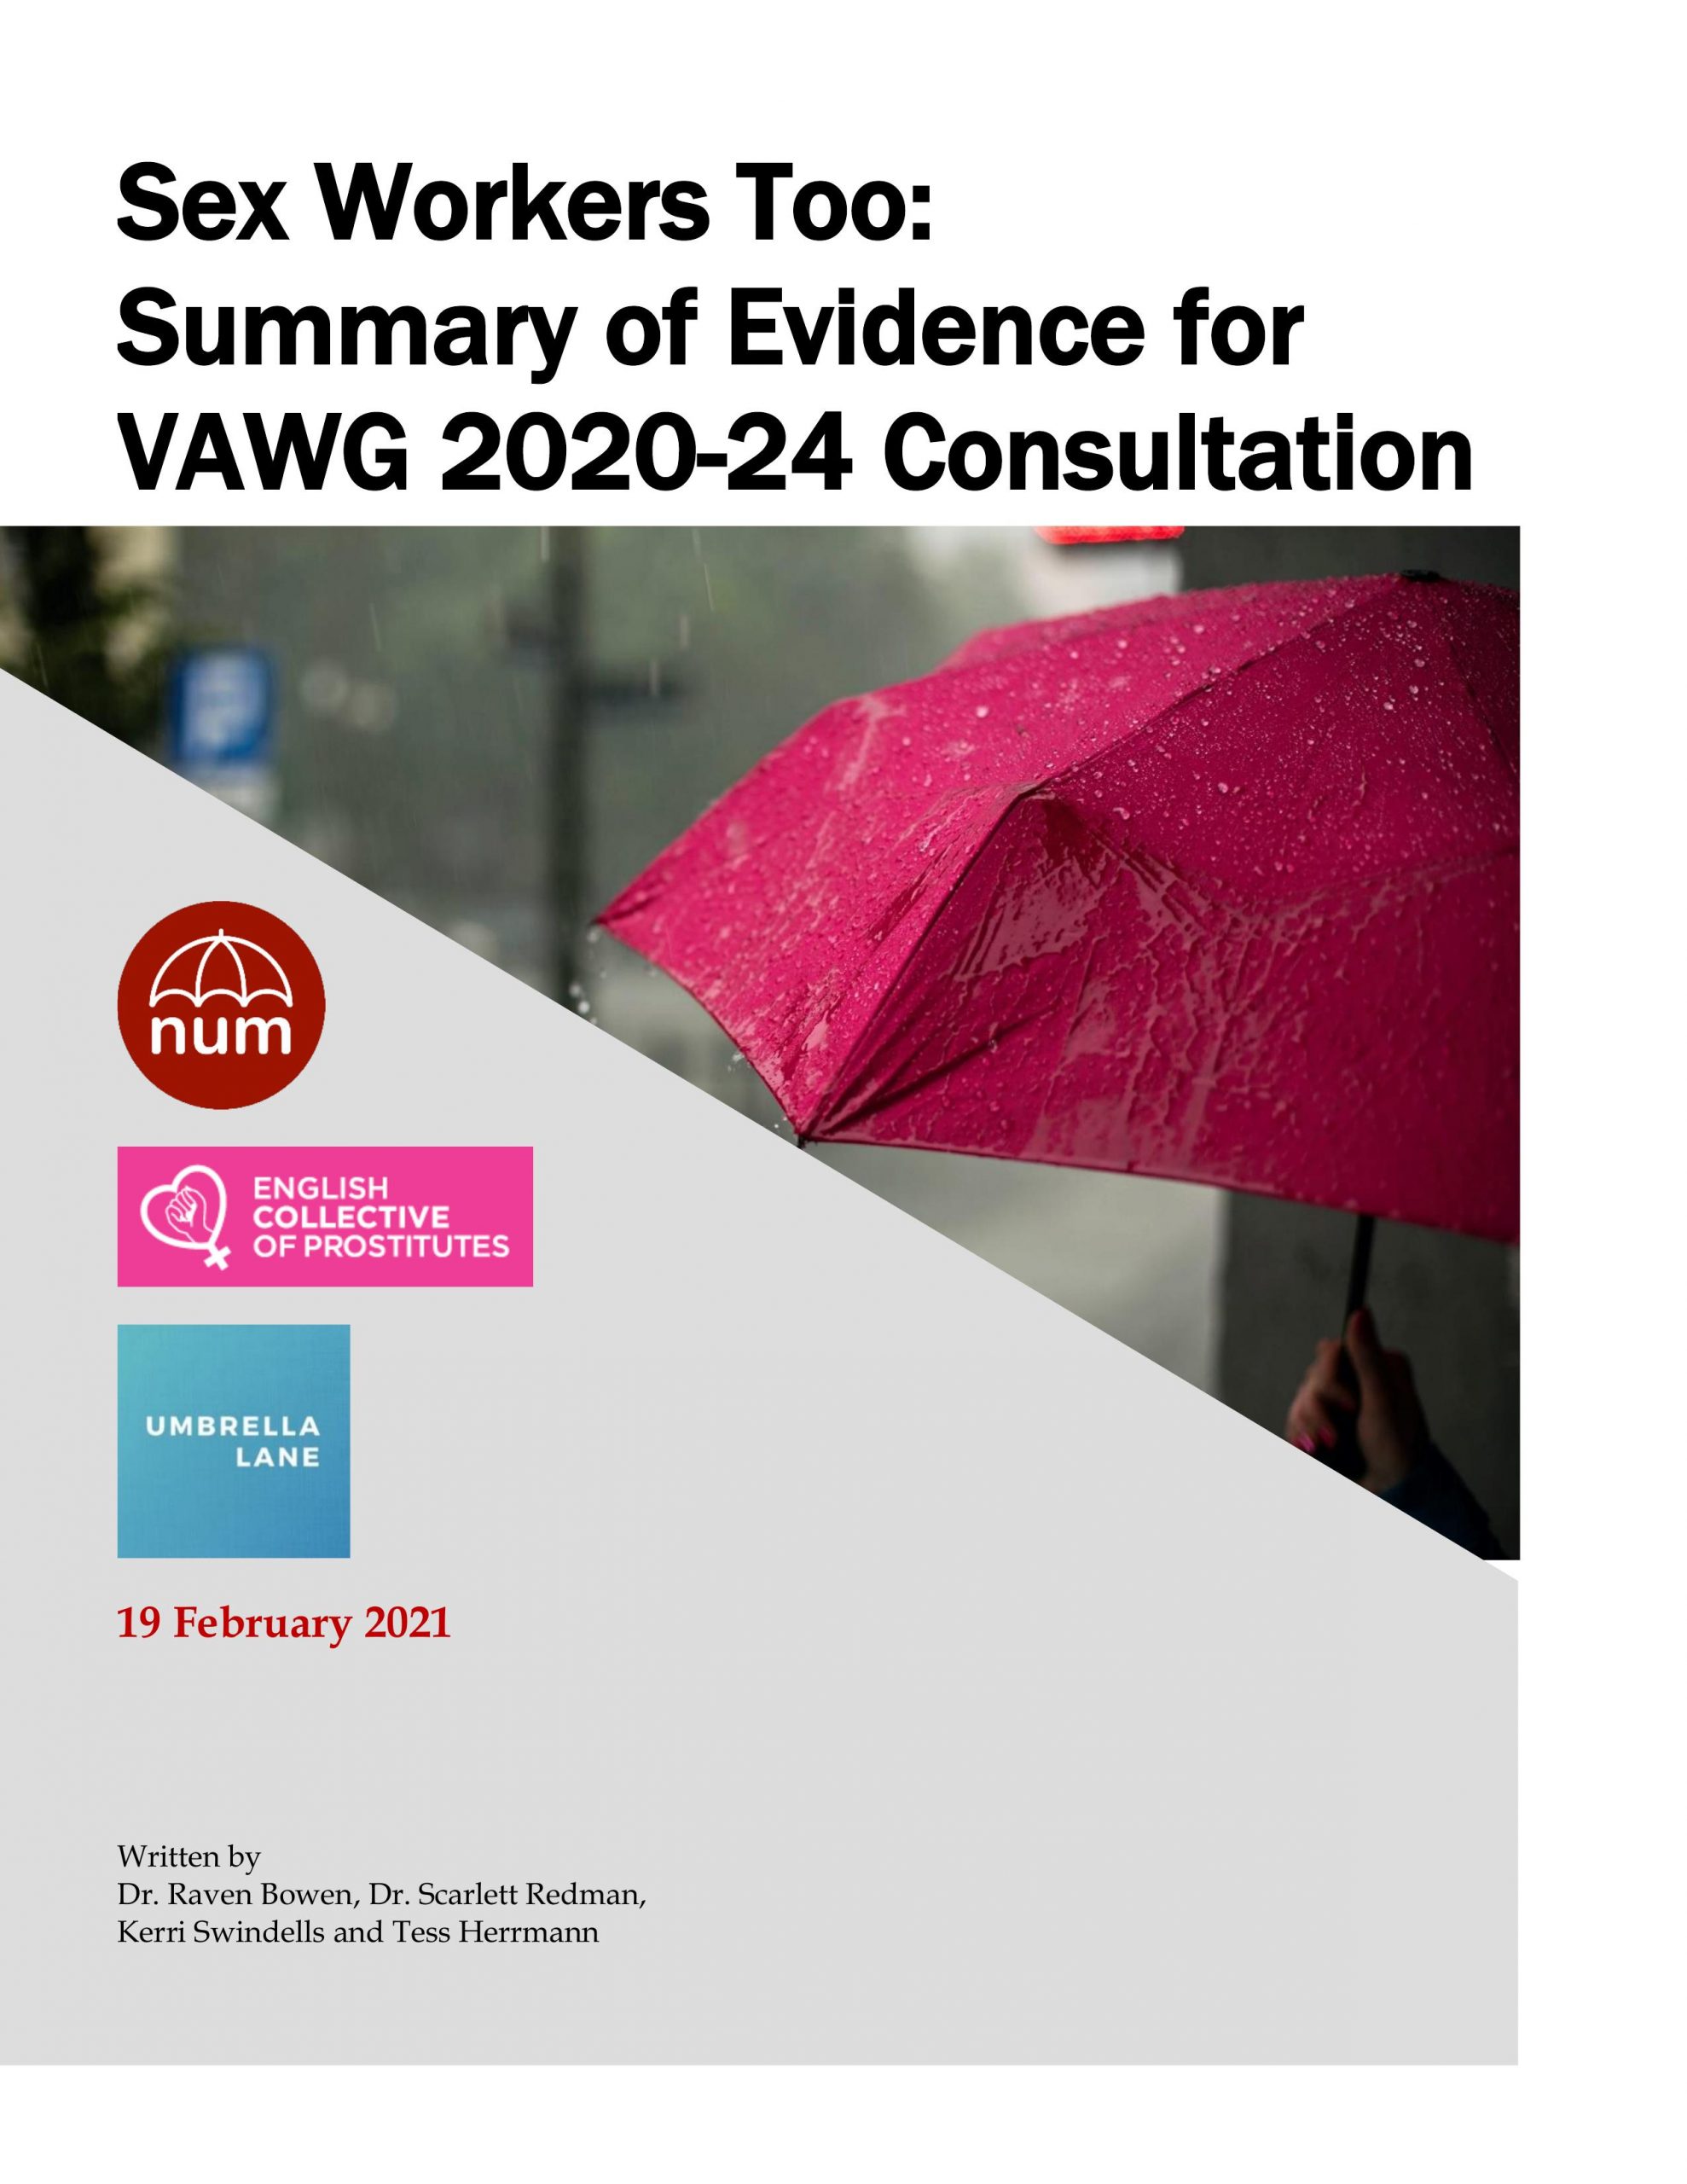 Sex-Workers-Too_NUM_ECP_UL_VAWG_Consultation_Submitted_19022021-1